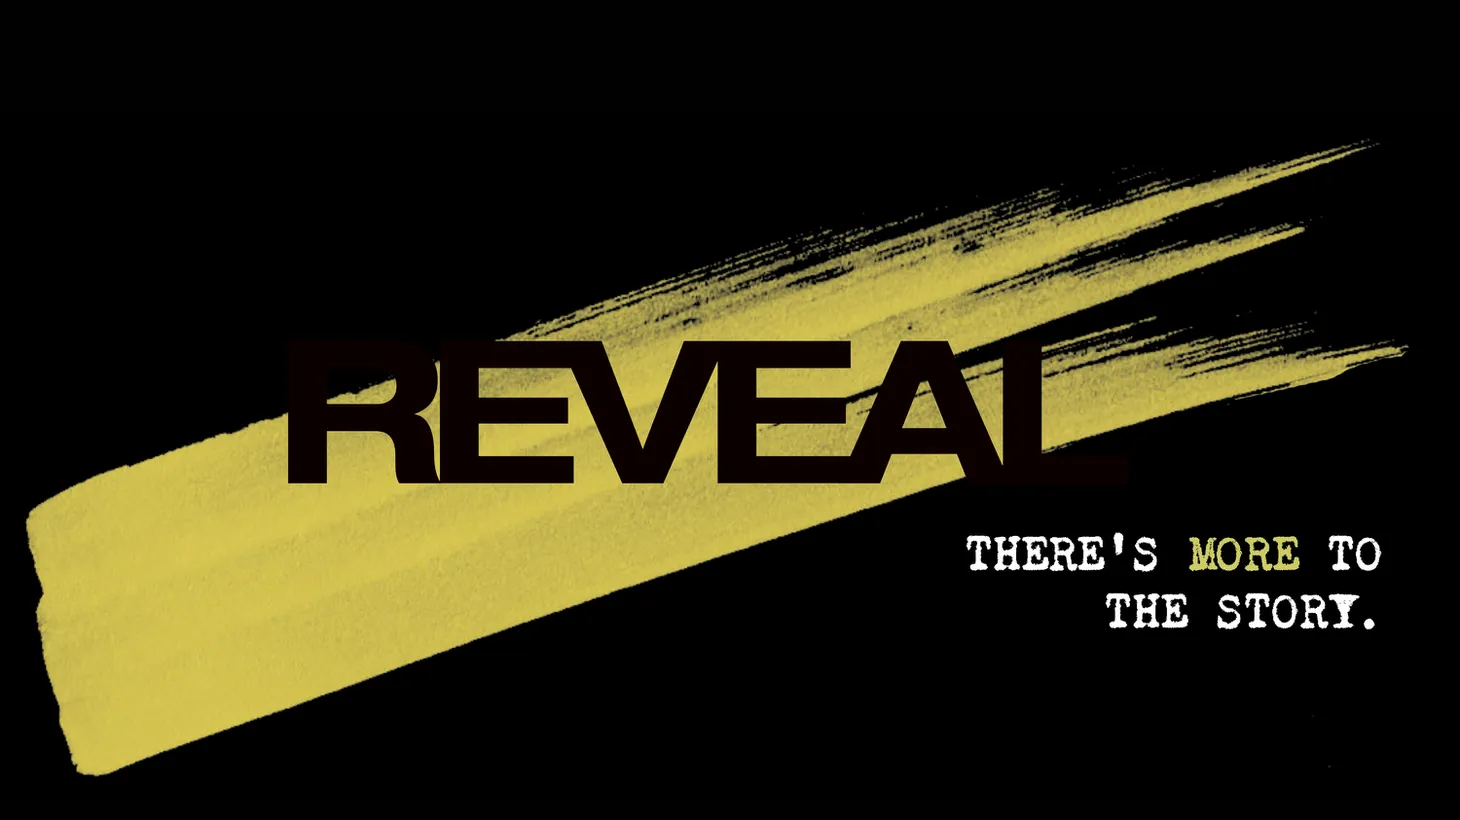 Reveal investigates who's responsible for protecting workers harmed on the job and examines the hidden problem of sexual assault on the night shift. Plus, the legacy of toxic chemicals used in electronics manufacturing, and why it was so hard to ban a tool that was injuring agricultural workers.